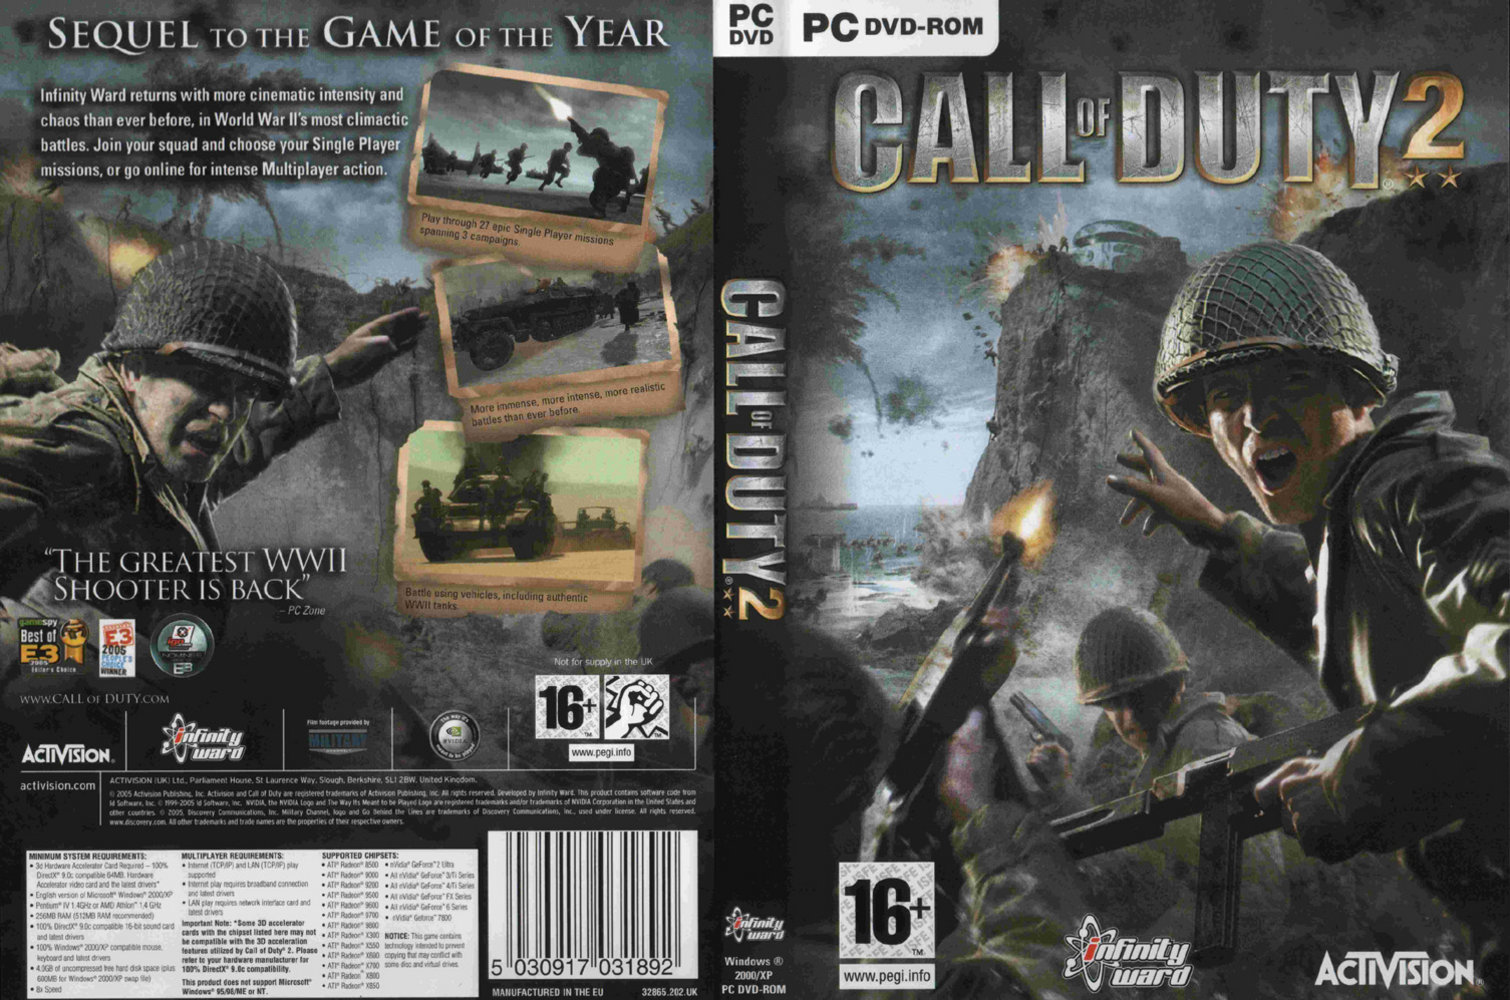 Download Call of Duty 2 Full PC - 